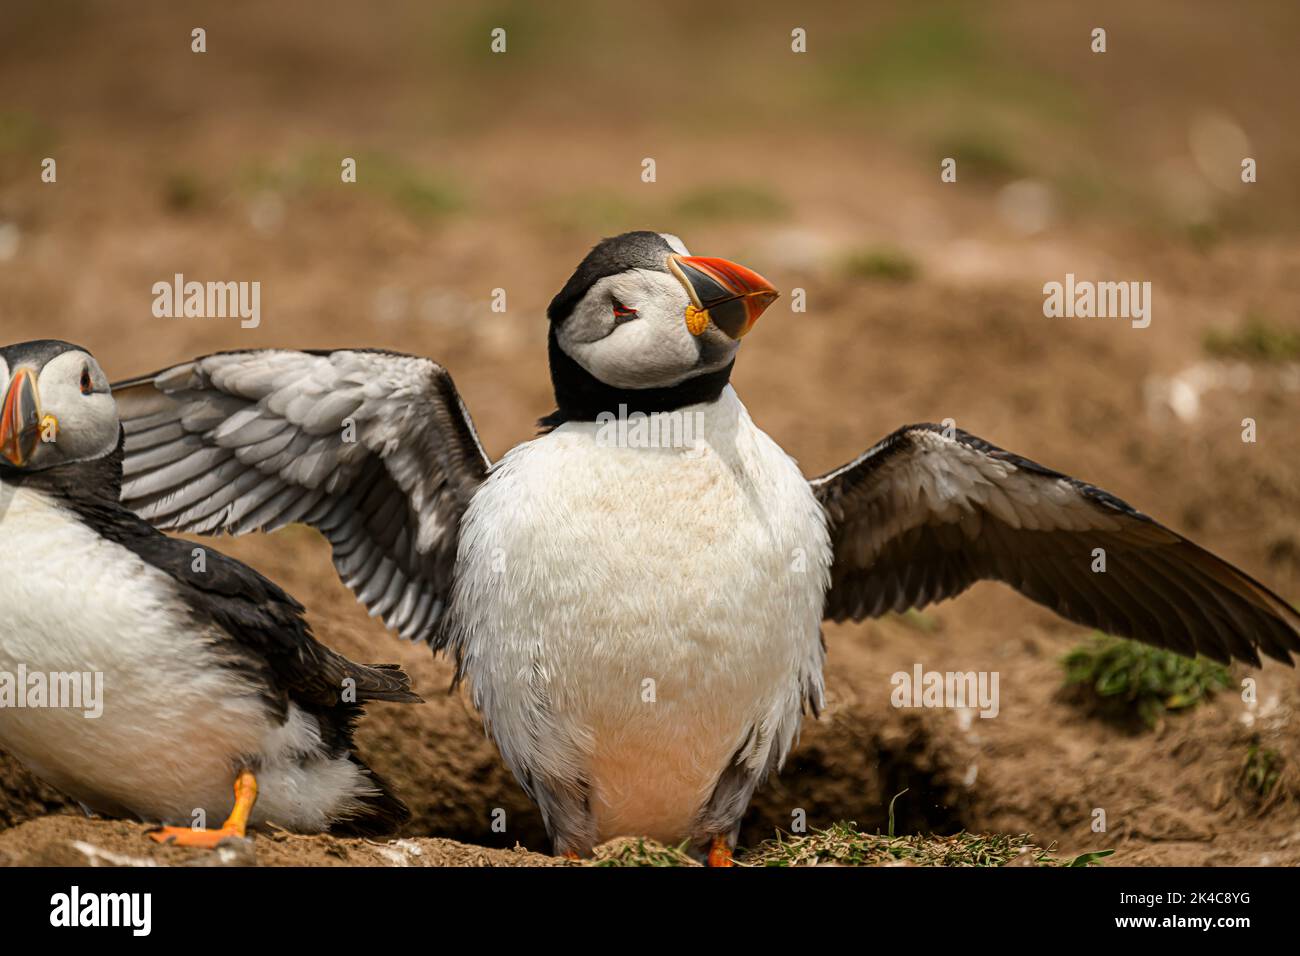 A closeup of two adorable Atlantic puffin birds with open wings standing on the ground Stock Photo